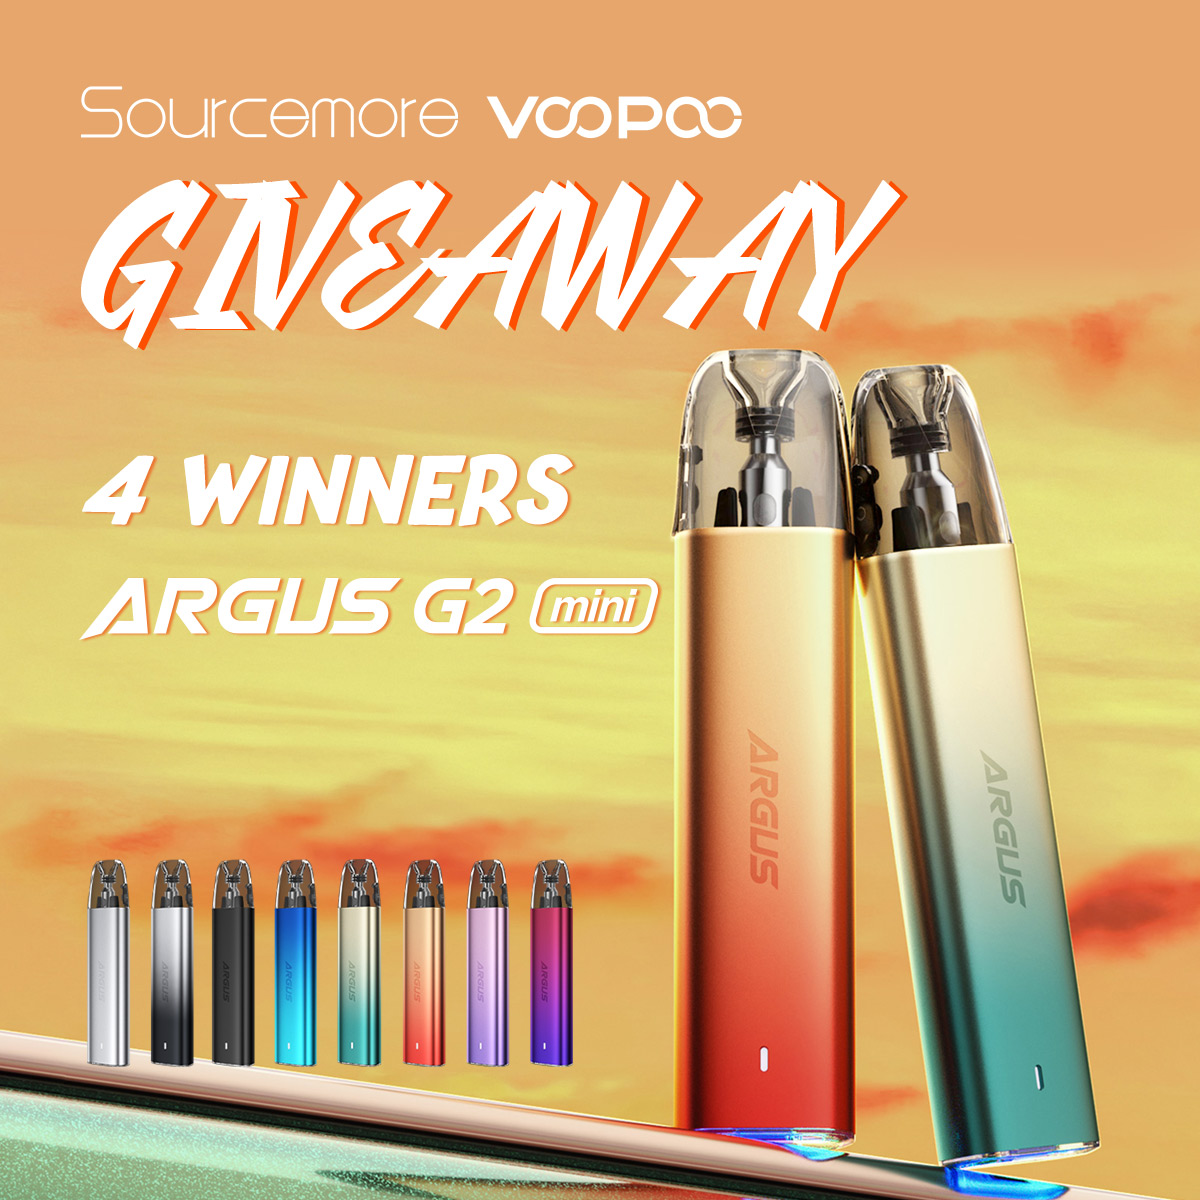 New Release Giveaway👏👏

Here comes VOOPOO & Sourcemore Giveaway!
VOOPOO Argus G2 Mini Kit 😍

Terms & Conditions 👉sourcemore.com/voopoo-argus-g…

Join in on the fun and you could be our lucky WINNER! 🏆

⚠ Warning: The device contains addictive nicotine. For Adult use only.